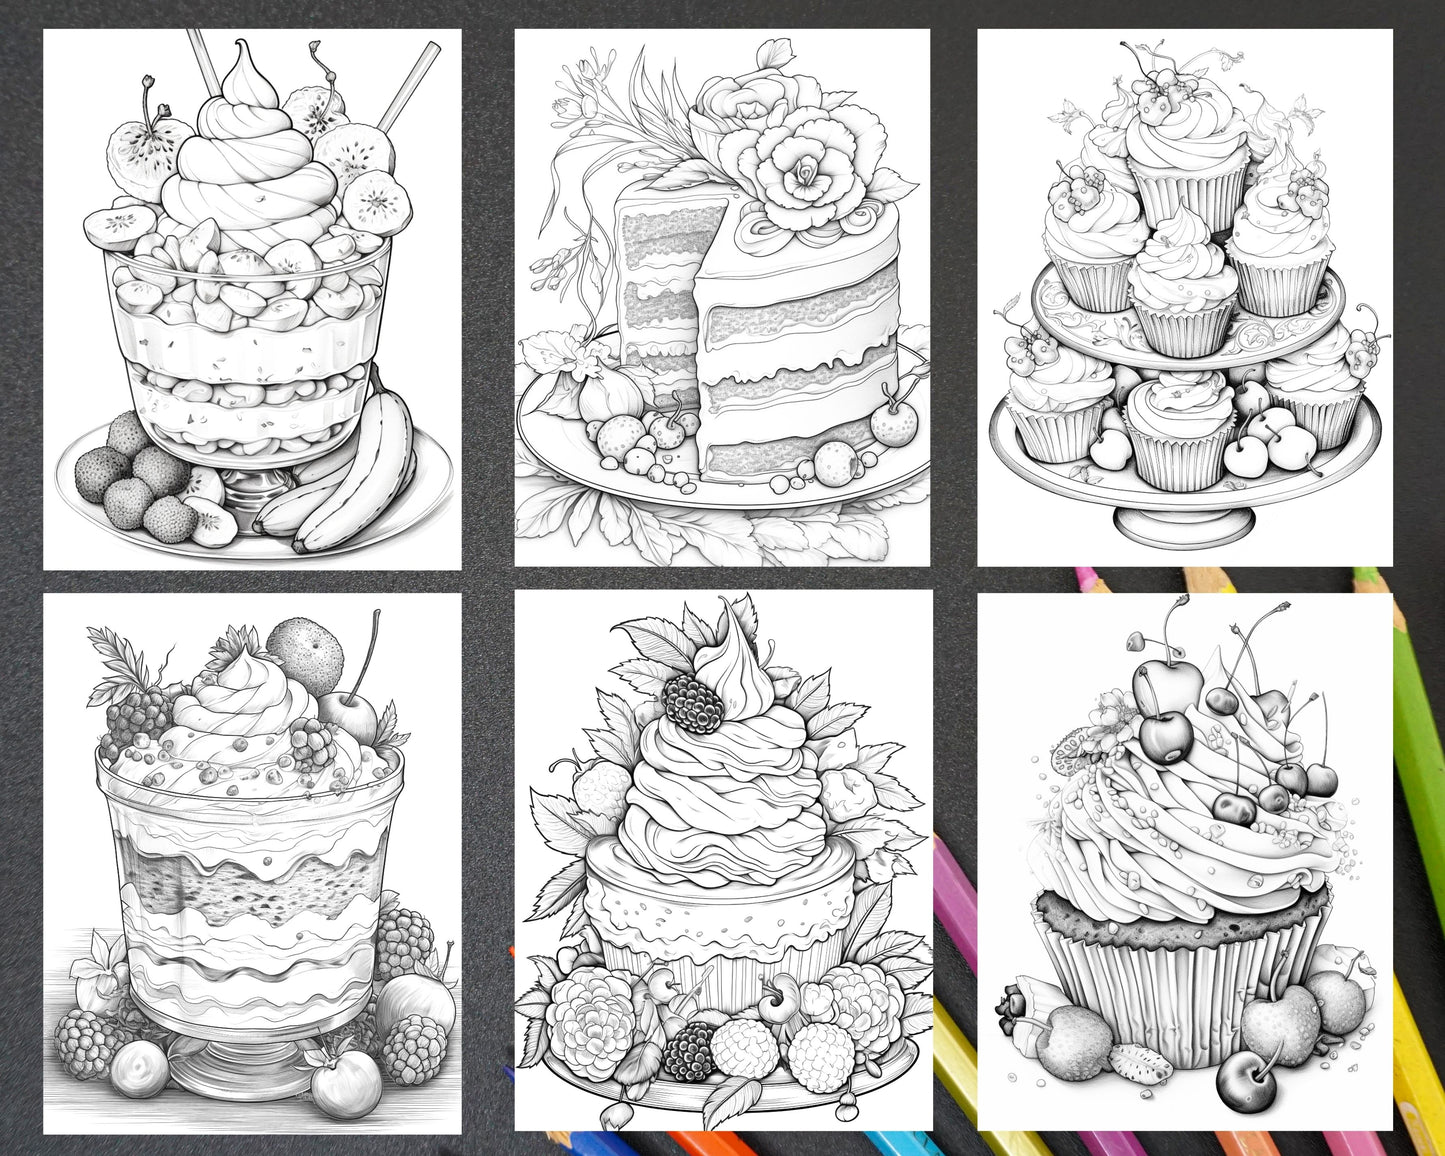 sweet dessert coloring pages, printable adult coloring book, relaxing coloring pages, instant digital download, cake coloring pages, cupcake coloring pages